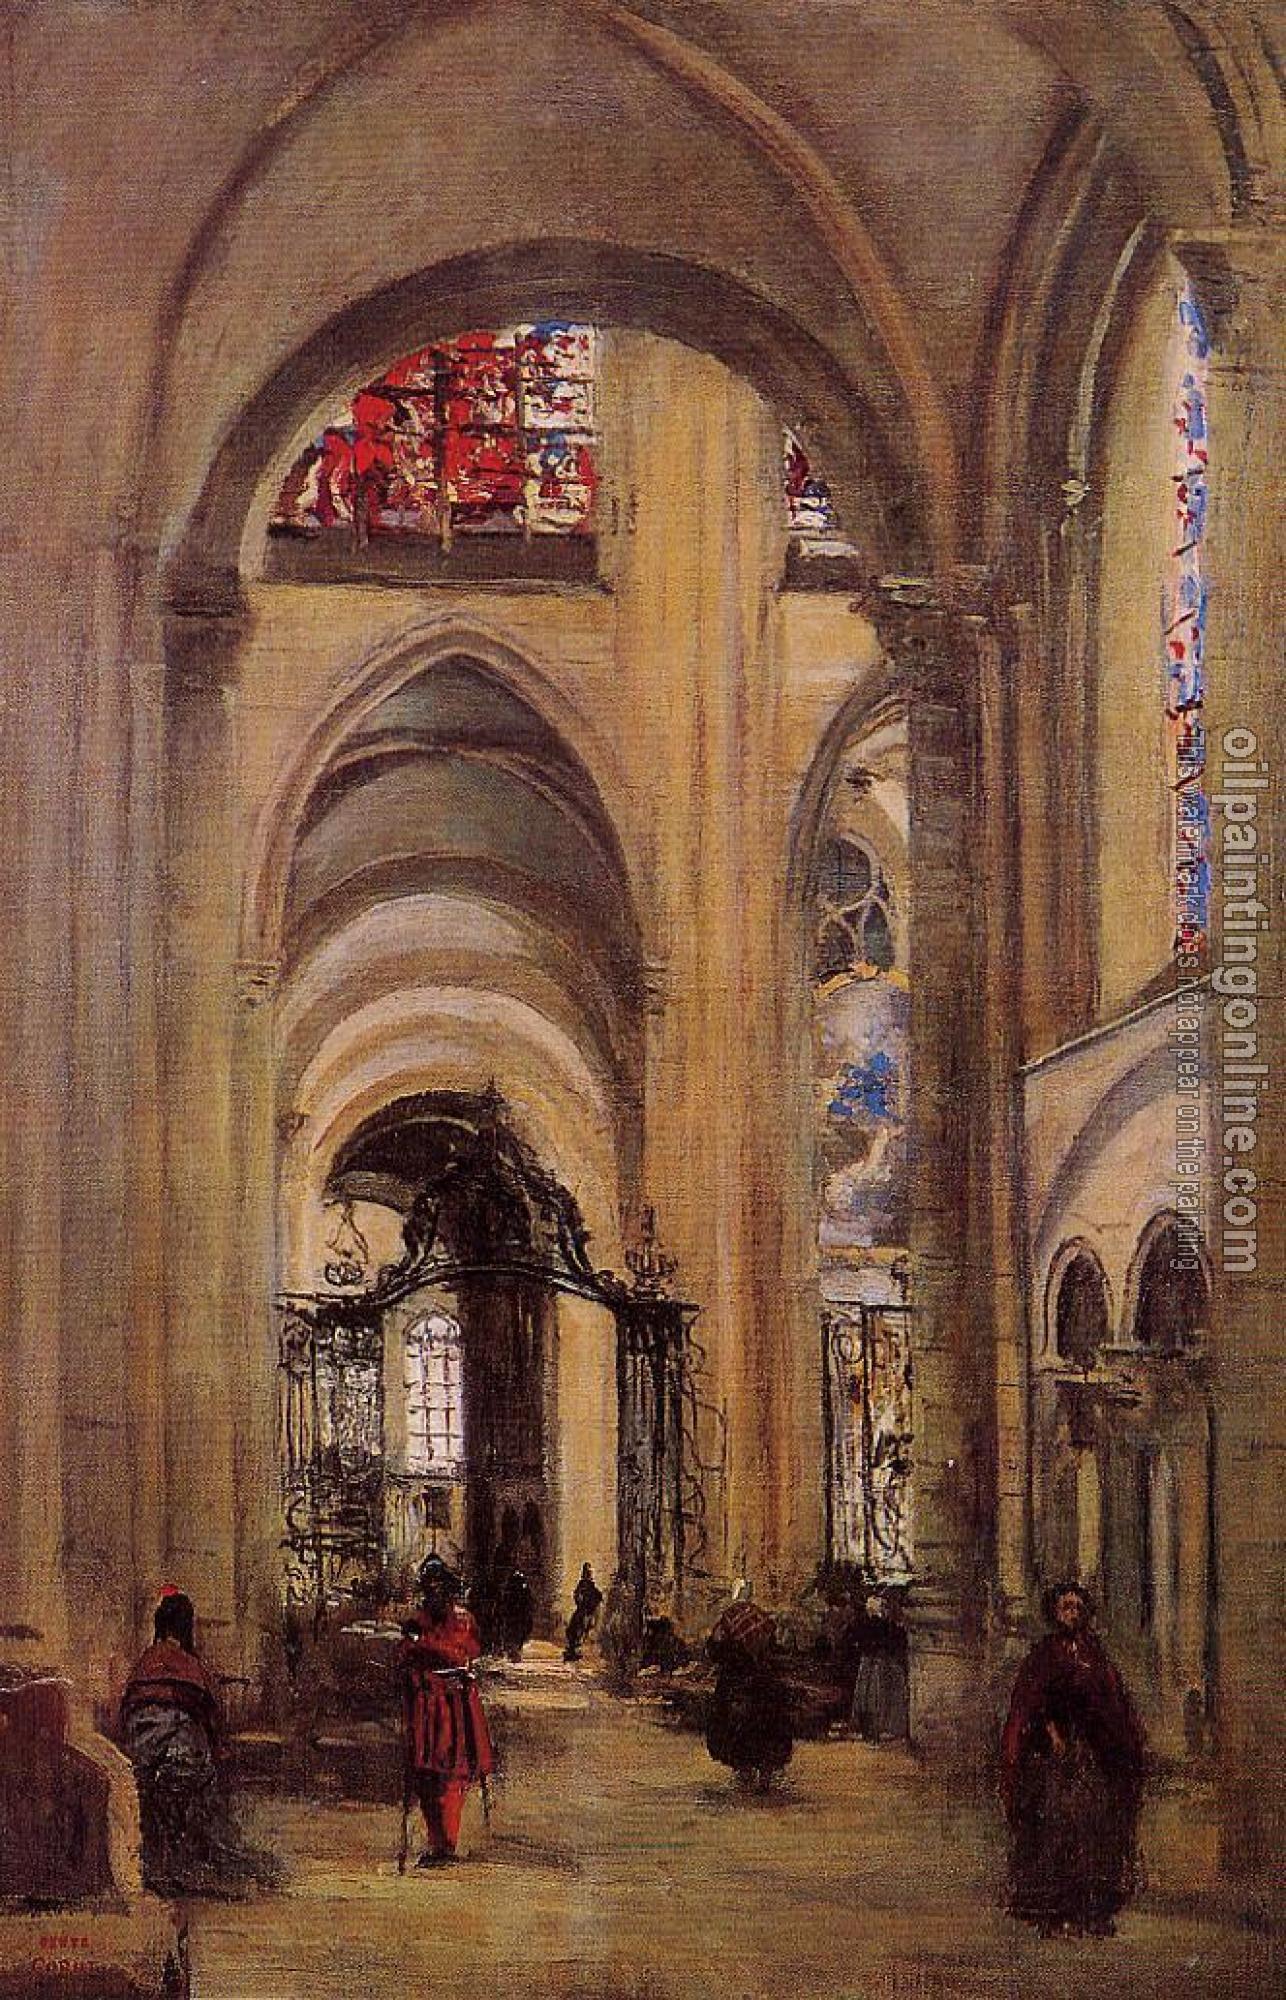 Corot, Jean-Baptiste-Camille - Interior of Sens Cathedral